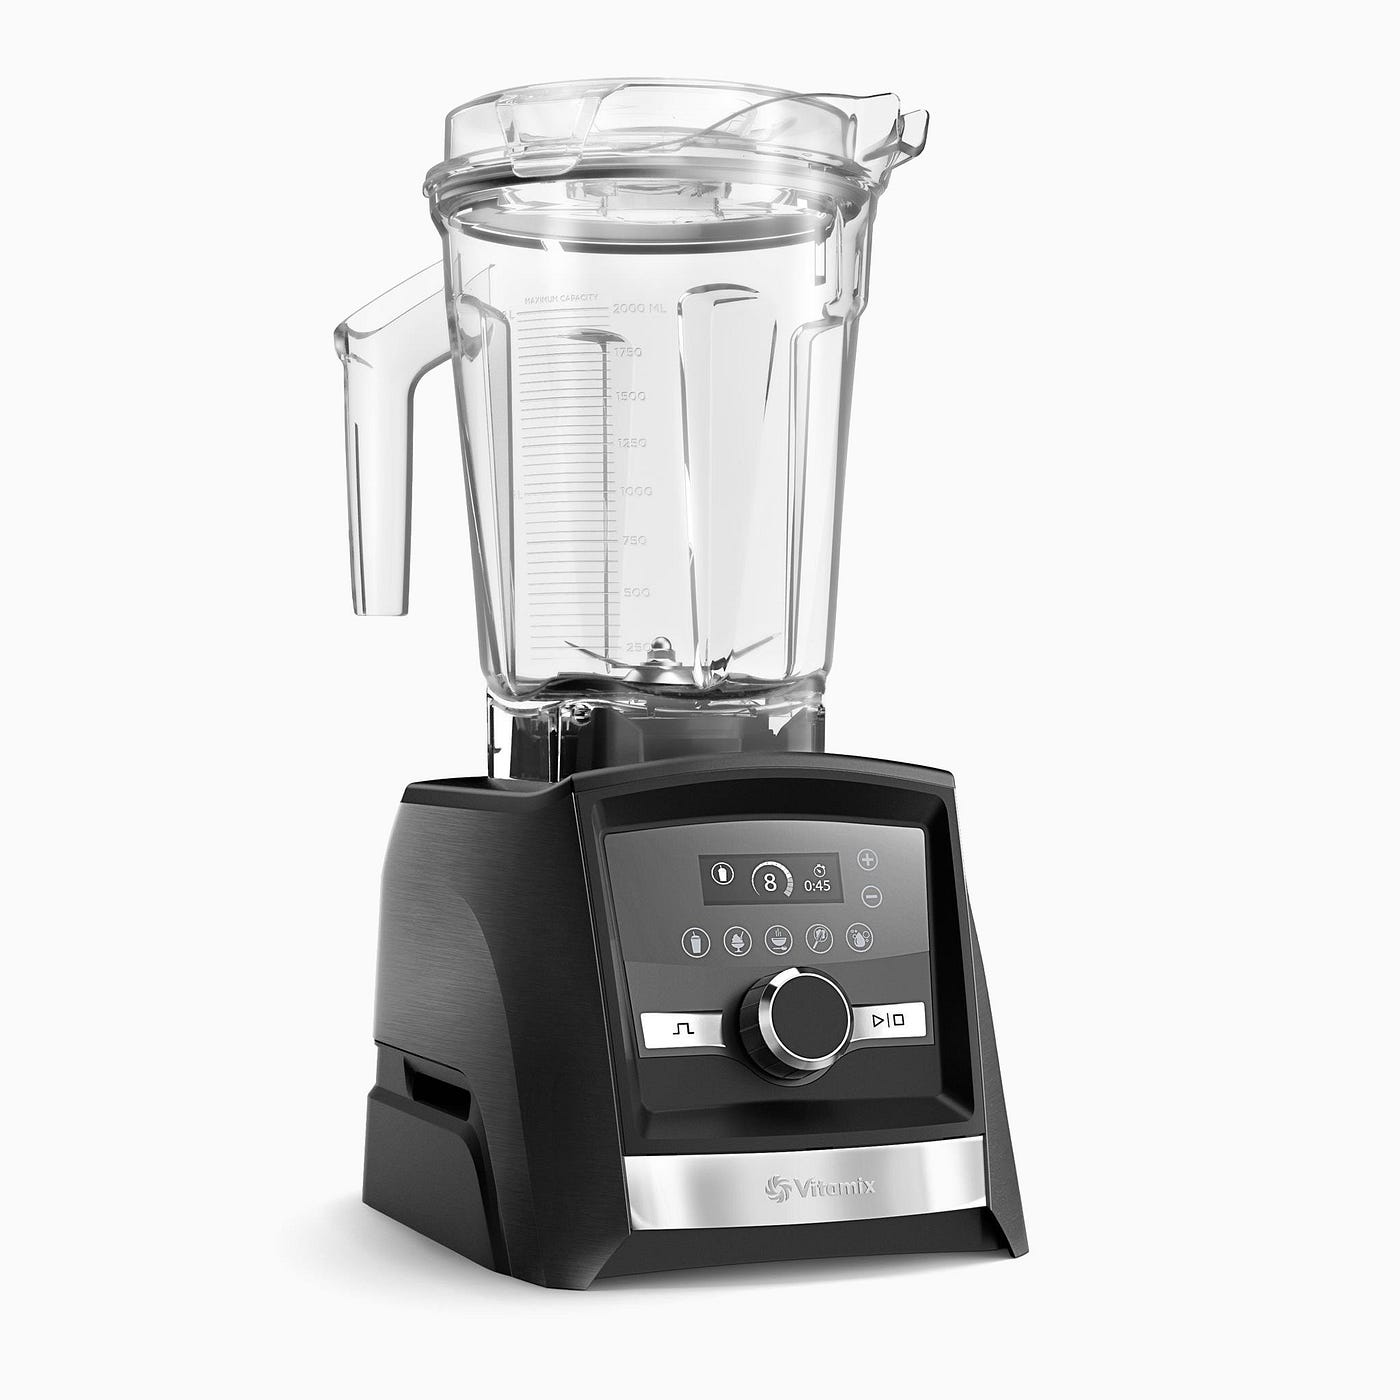 THE 5 BEST BLENDERS FOR SMOOTHIES, SHAKES, AND FROZEN DRINKS | by Shaku  Bansal | Medium